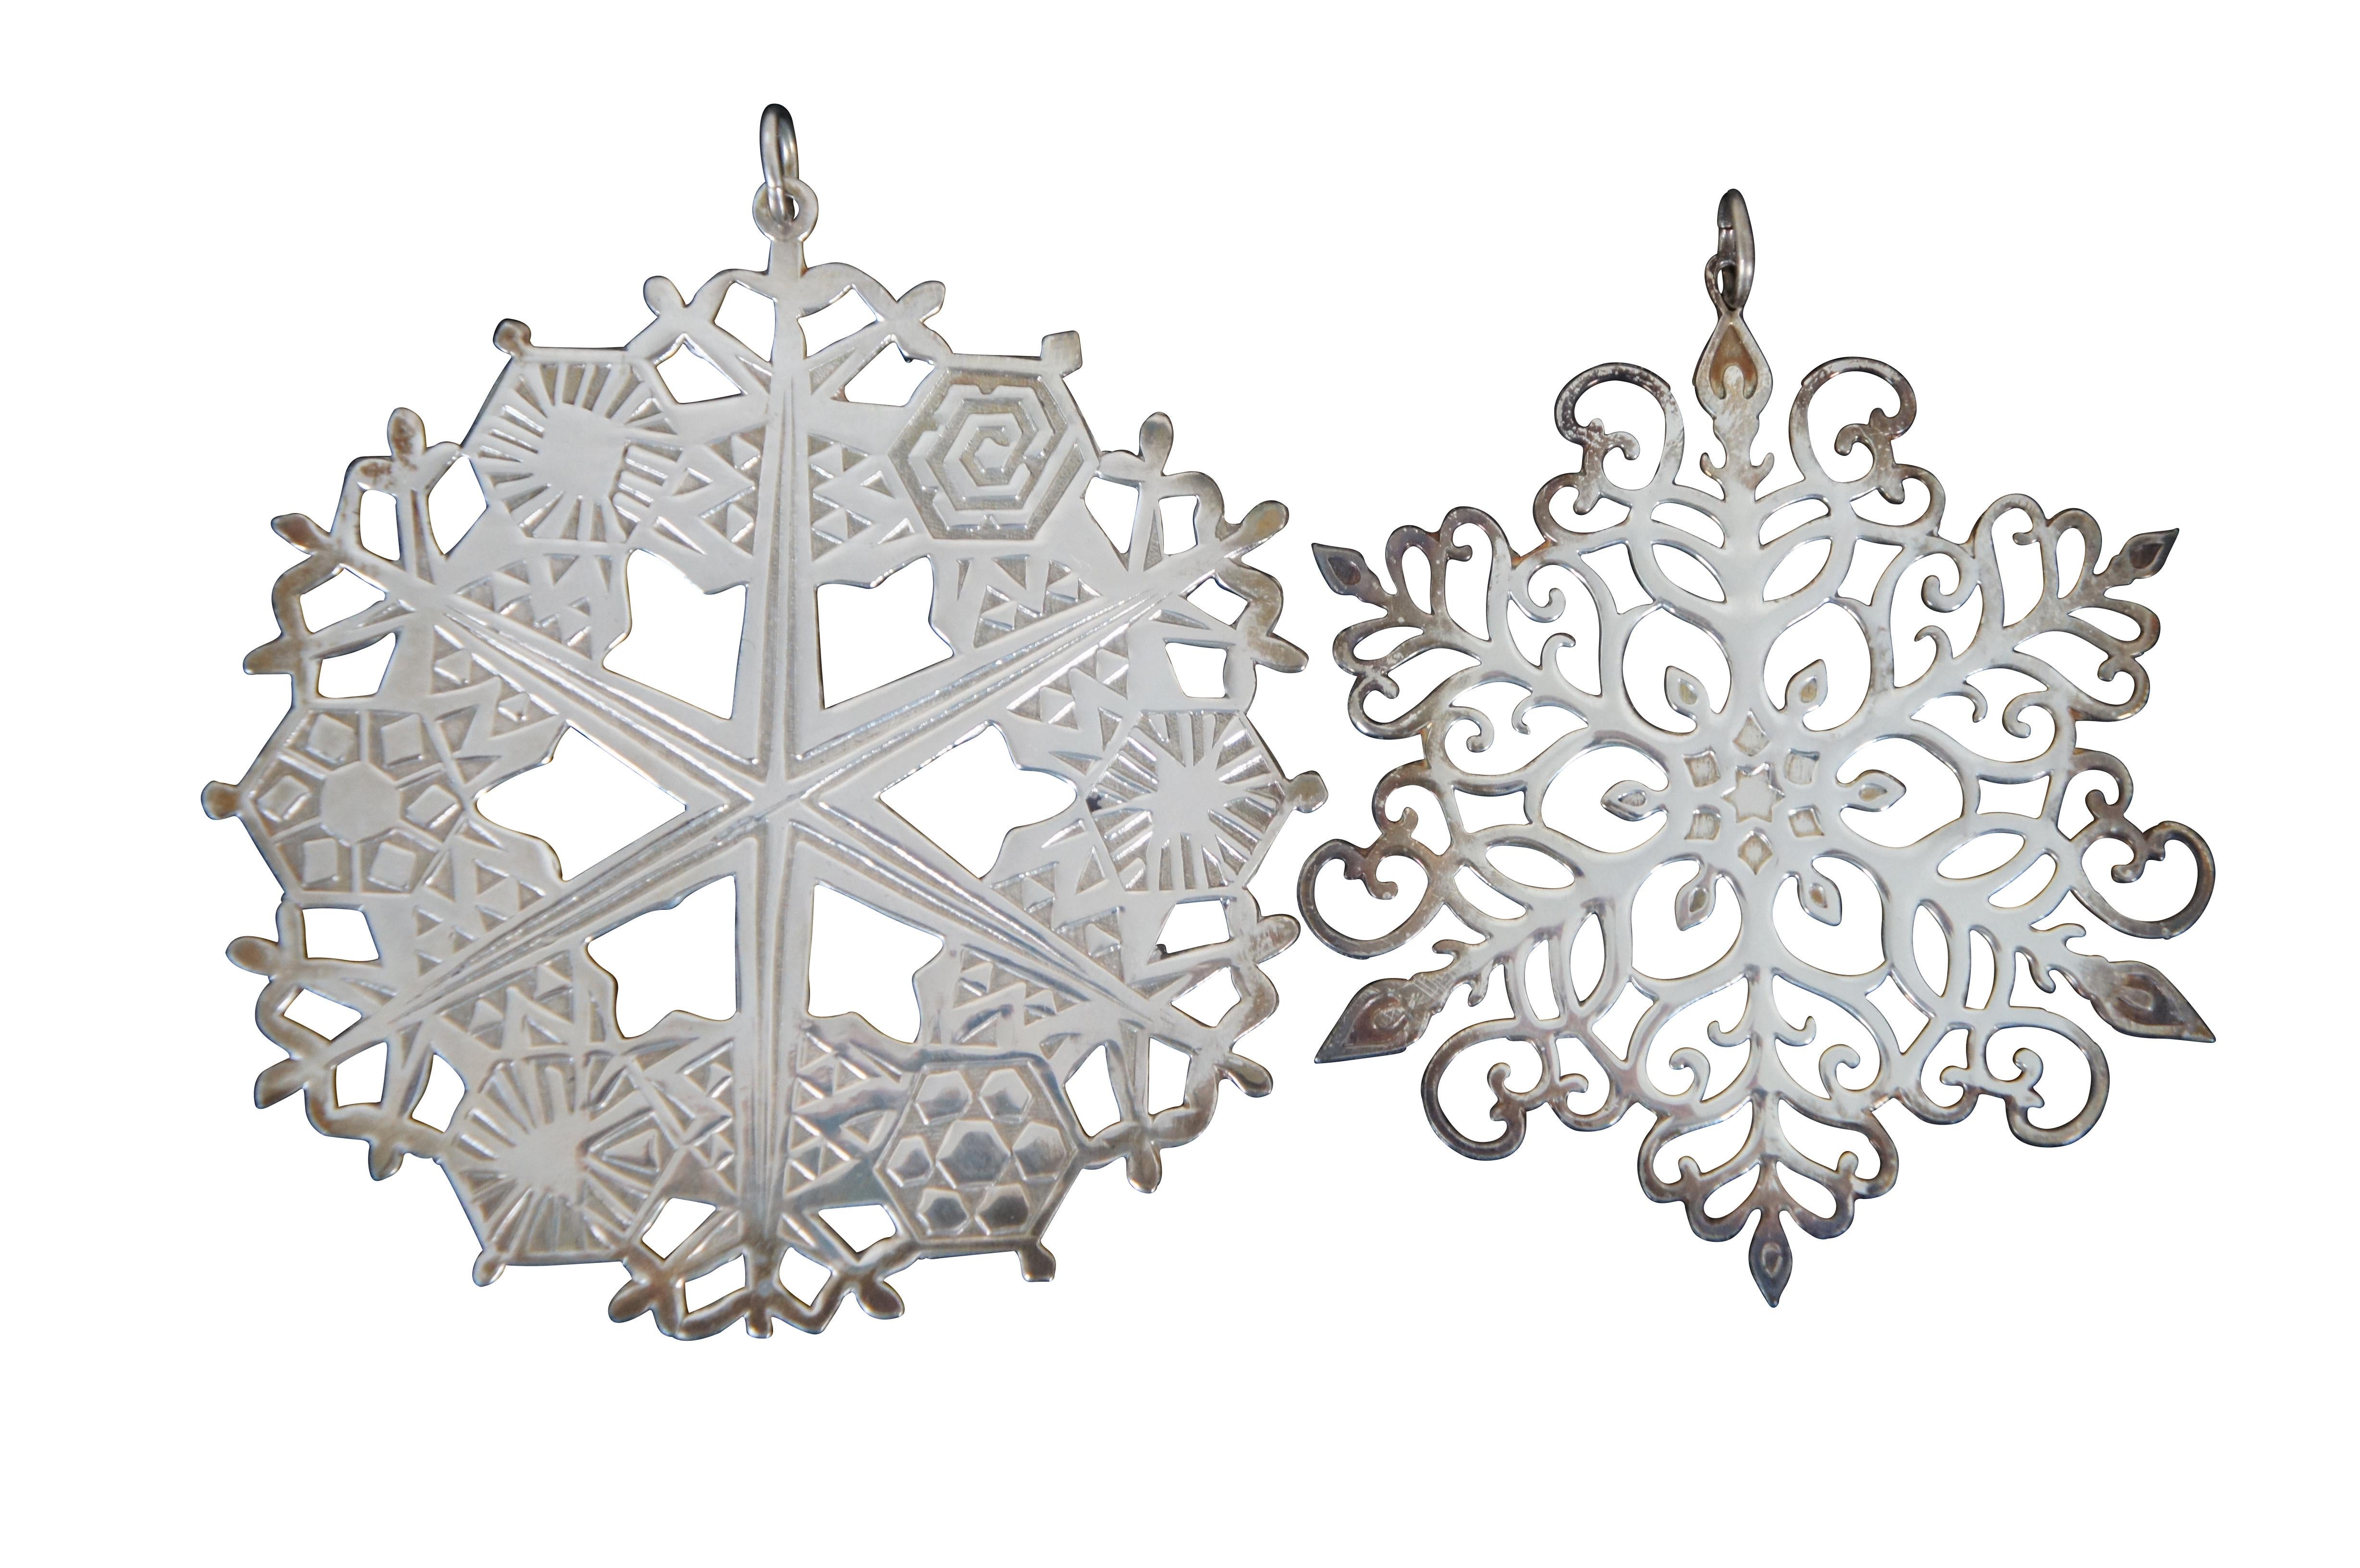 12 Metropolitan Museum of Art Sterling Silver Silverplate Snowflake Ornaments In Good Condition For Sale In Dayton, OH